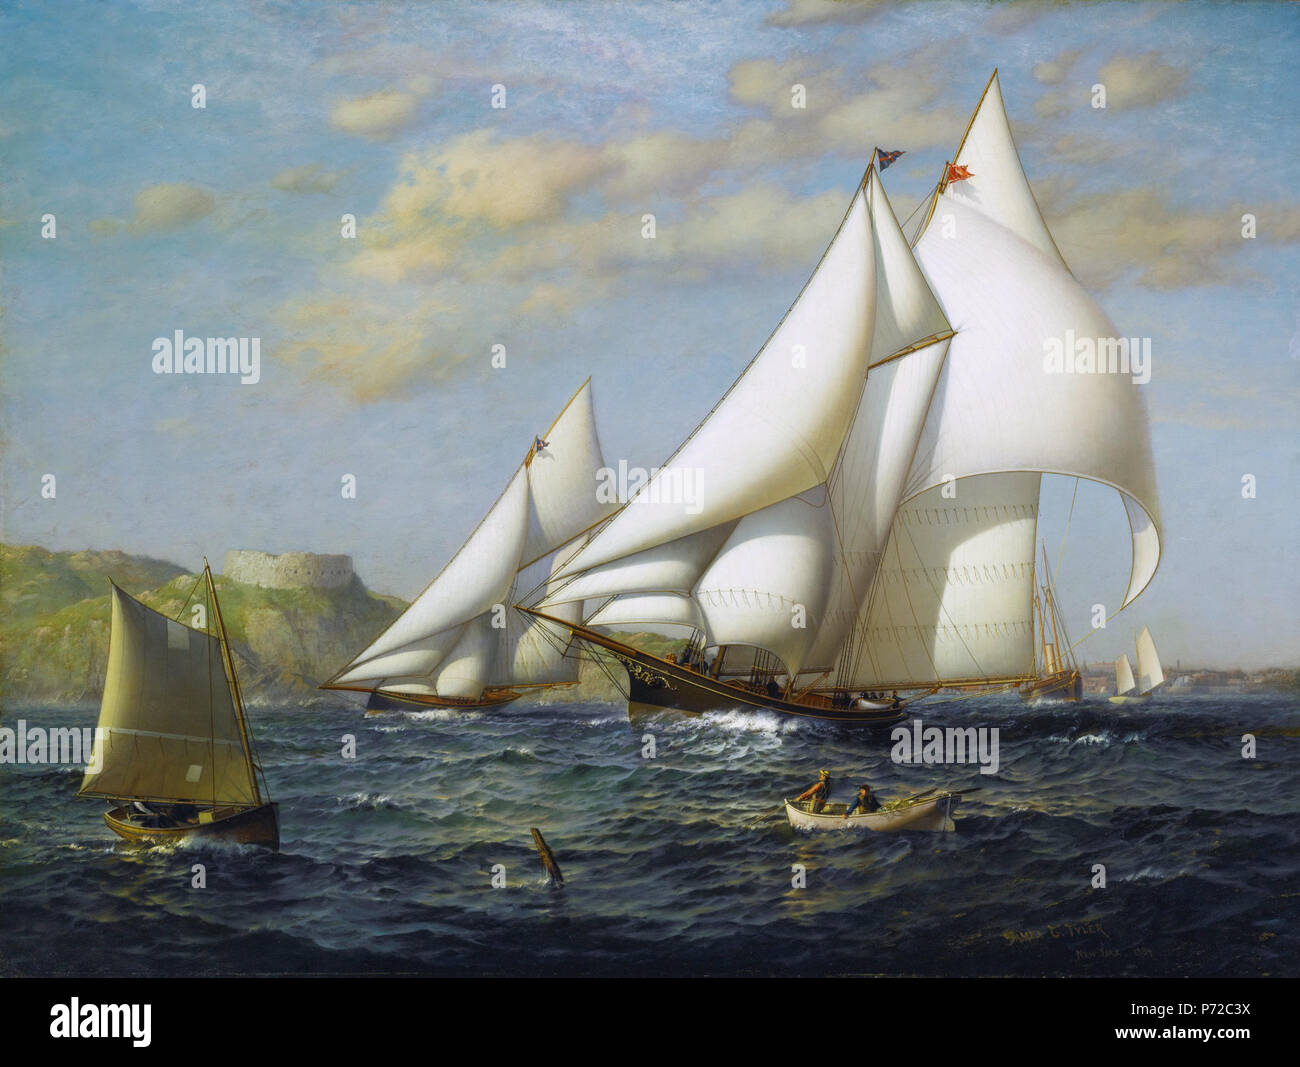 English: New York Yacht Club racing boats in New York Harbor oil on canvas 76.5 x 102 cm signed b.r.: James G. Tyler / New York 1884  . 1884 169 New York Yacht Club racing boats in New York Harbor, by James Gale Tyler Stock Photo